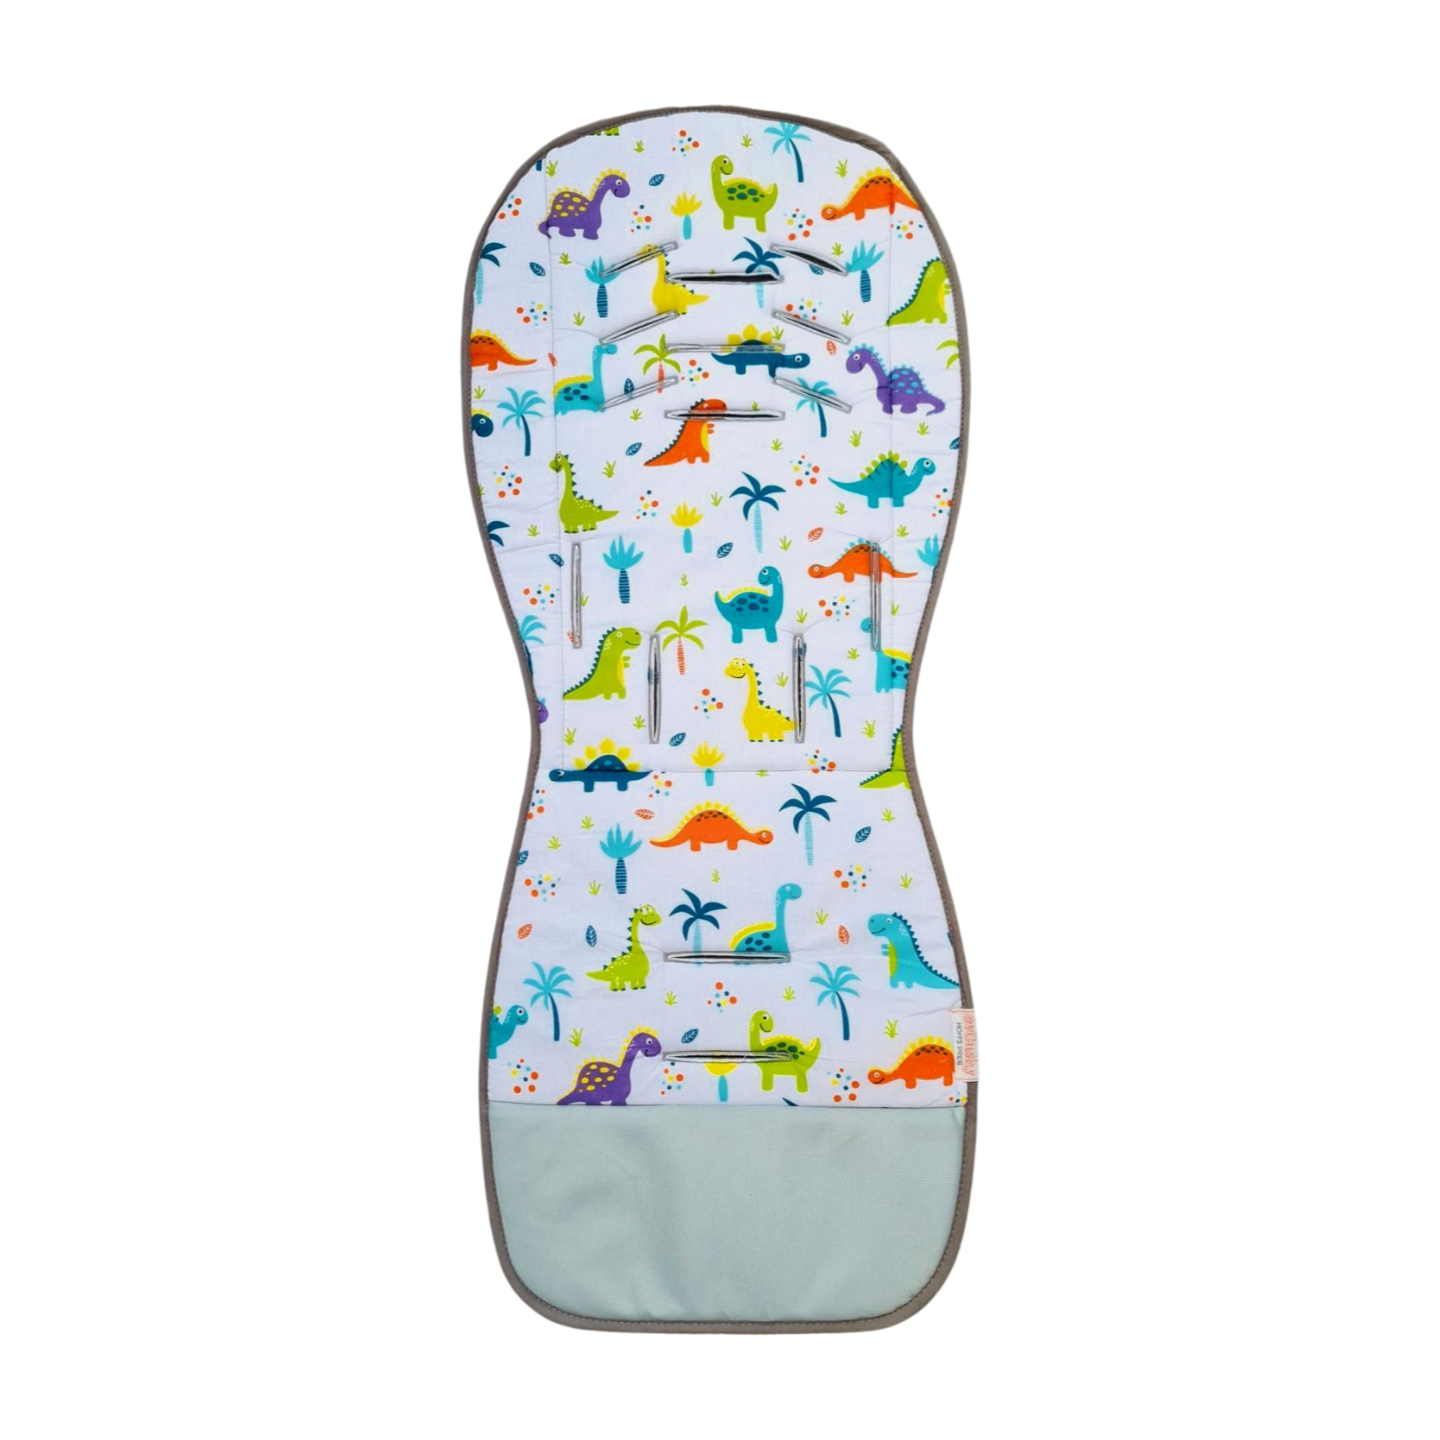 comfortable liner for pram universal with holes for 5 point harness dinosaurs pattern